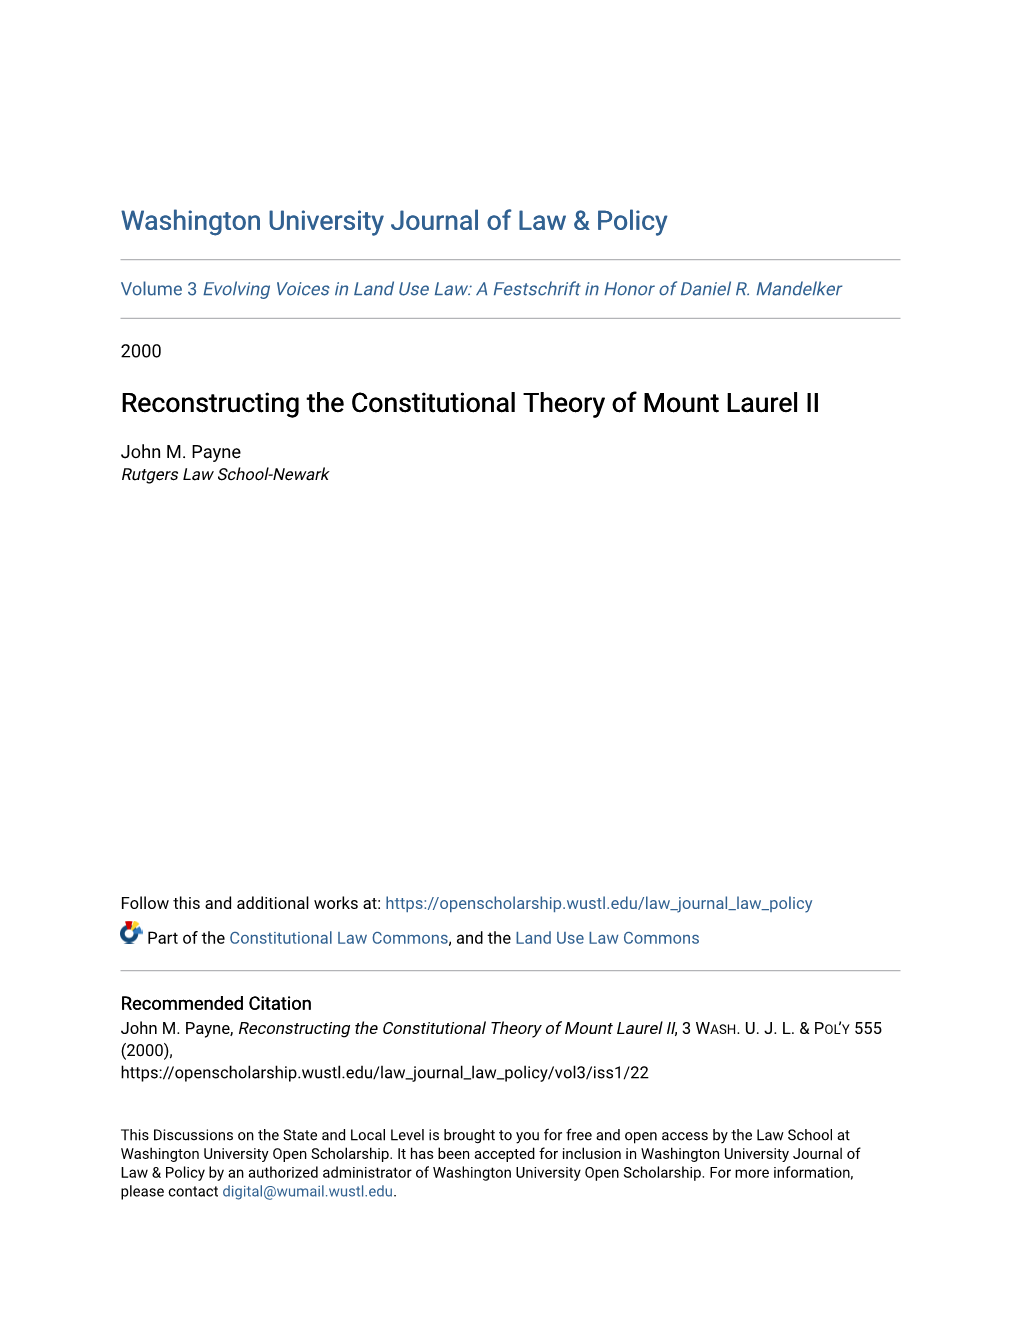 Reconstructing the Constitutional Theory of Mount Laurel II